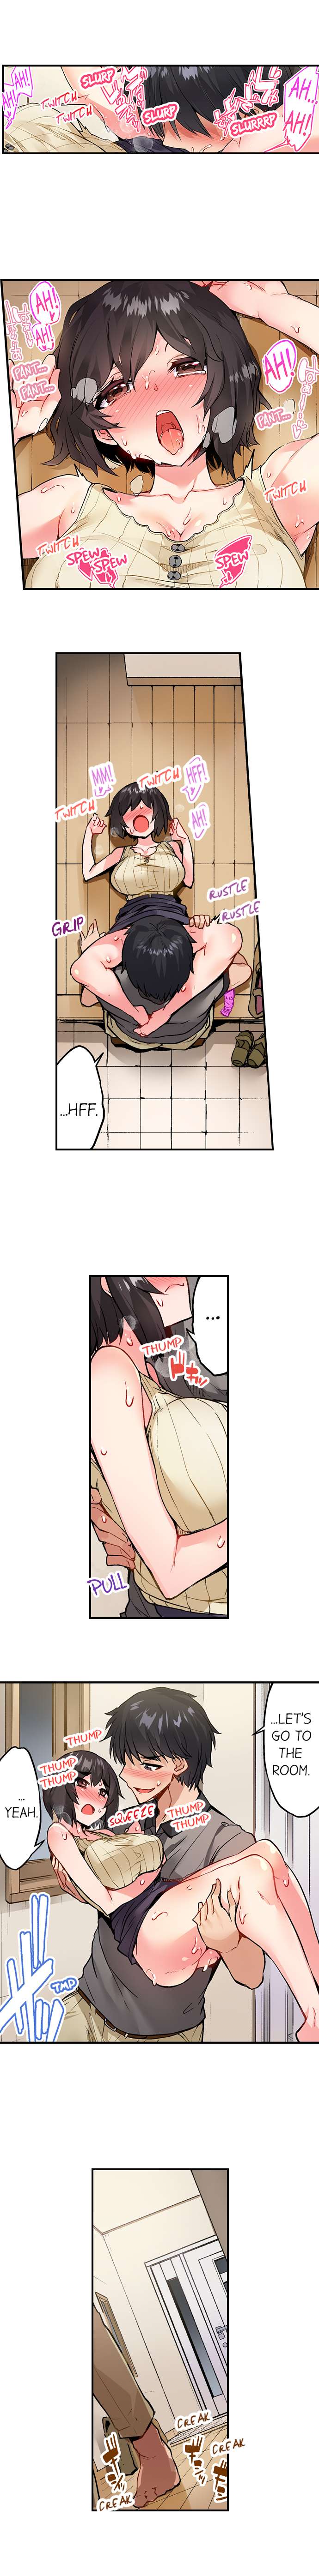 Traditional Job of Washing Girls’ Body Chapter 145 - Page 5